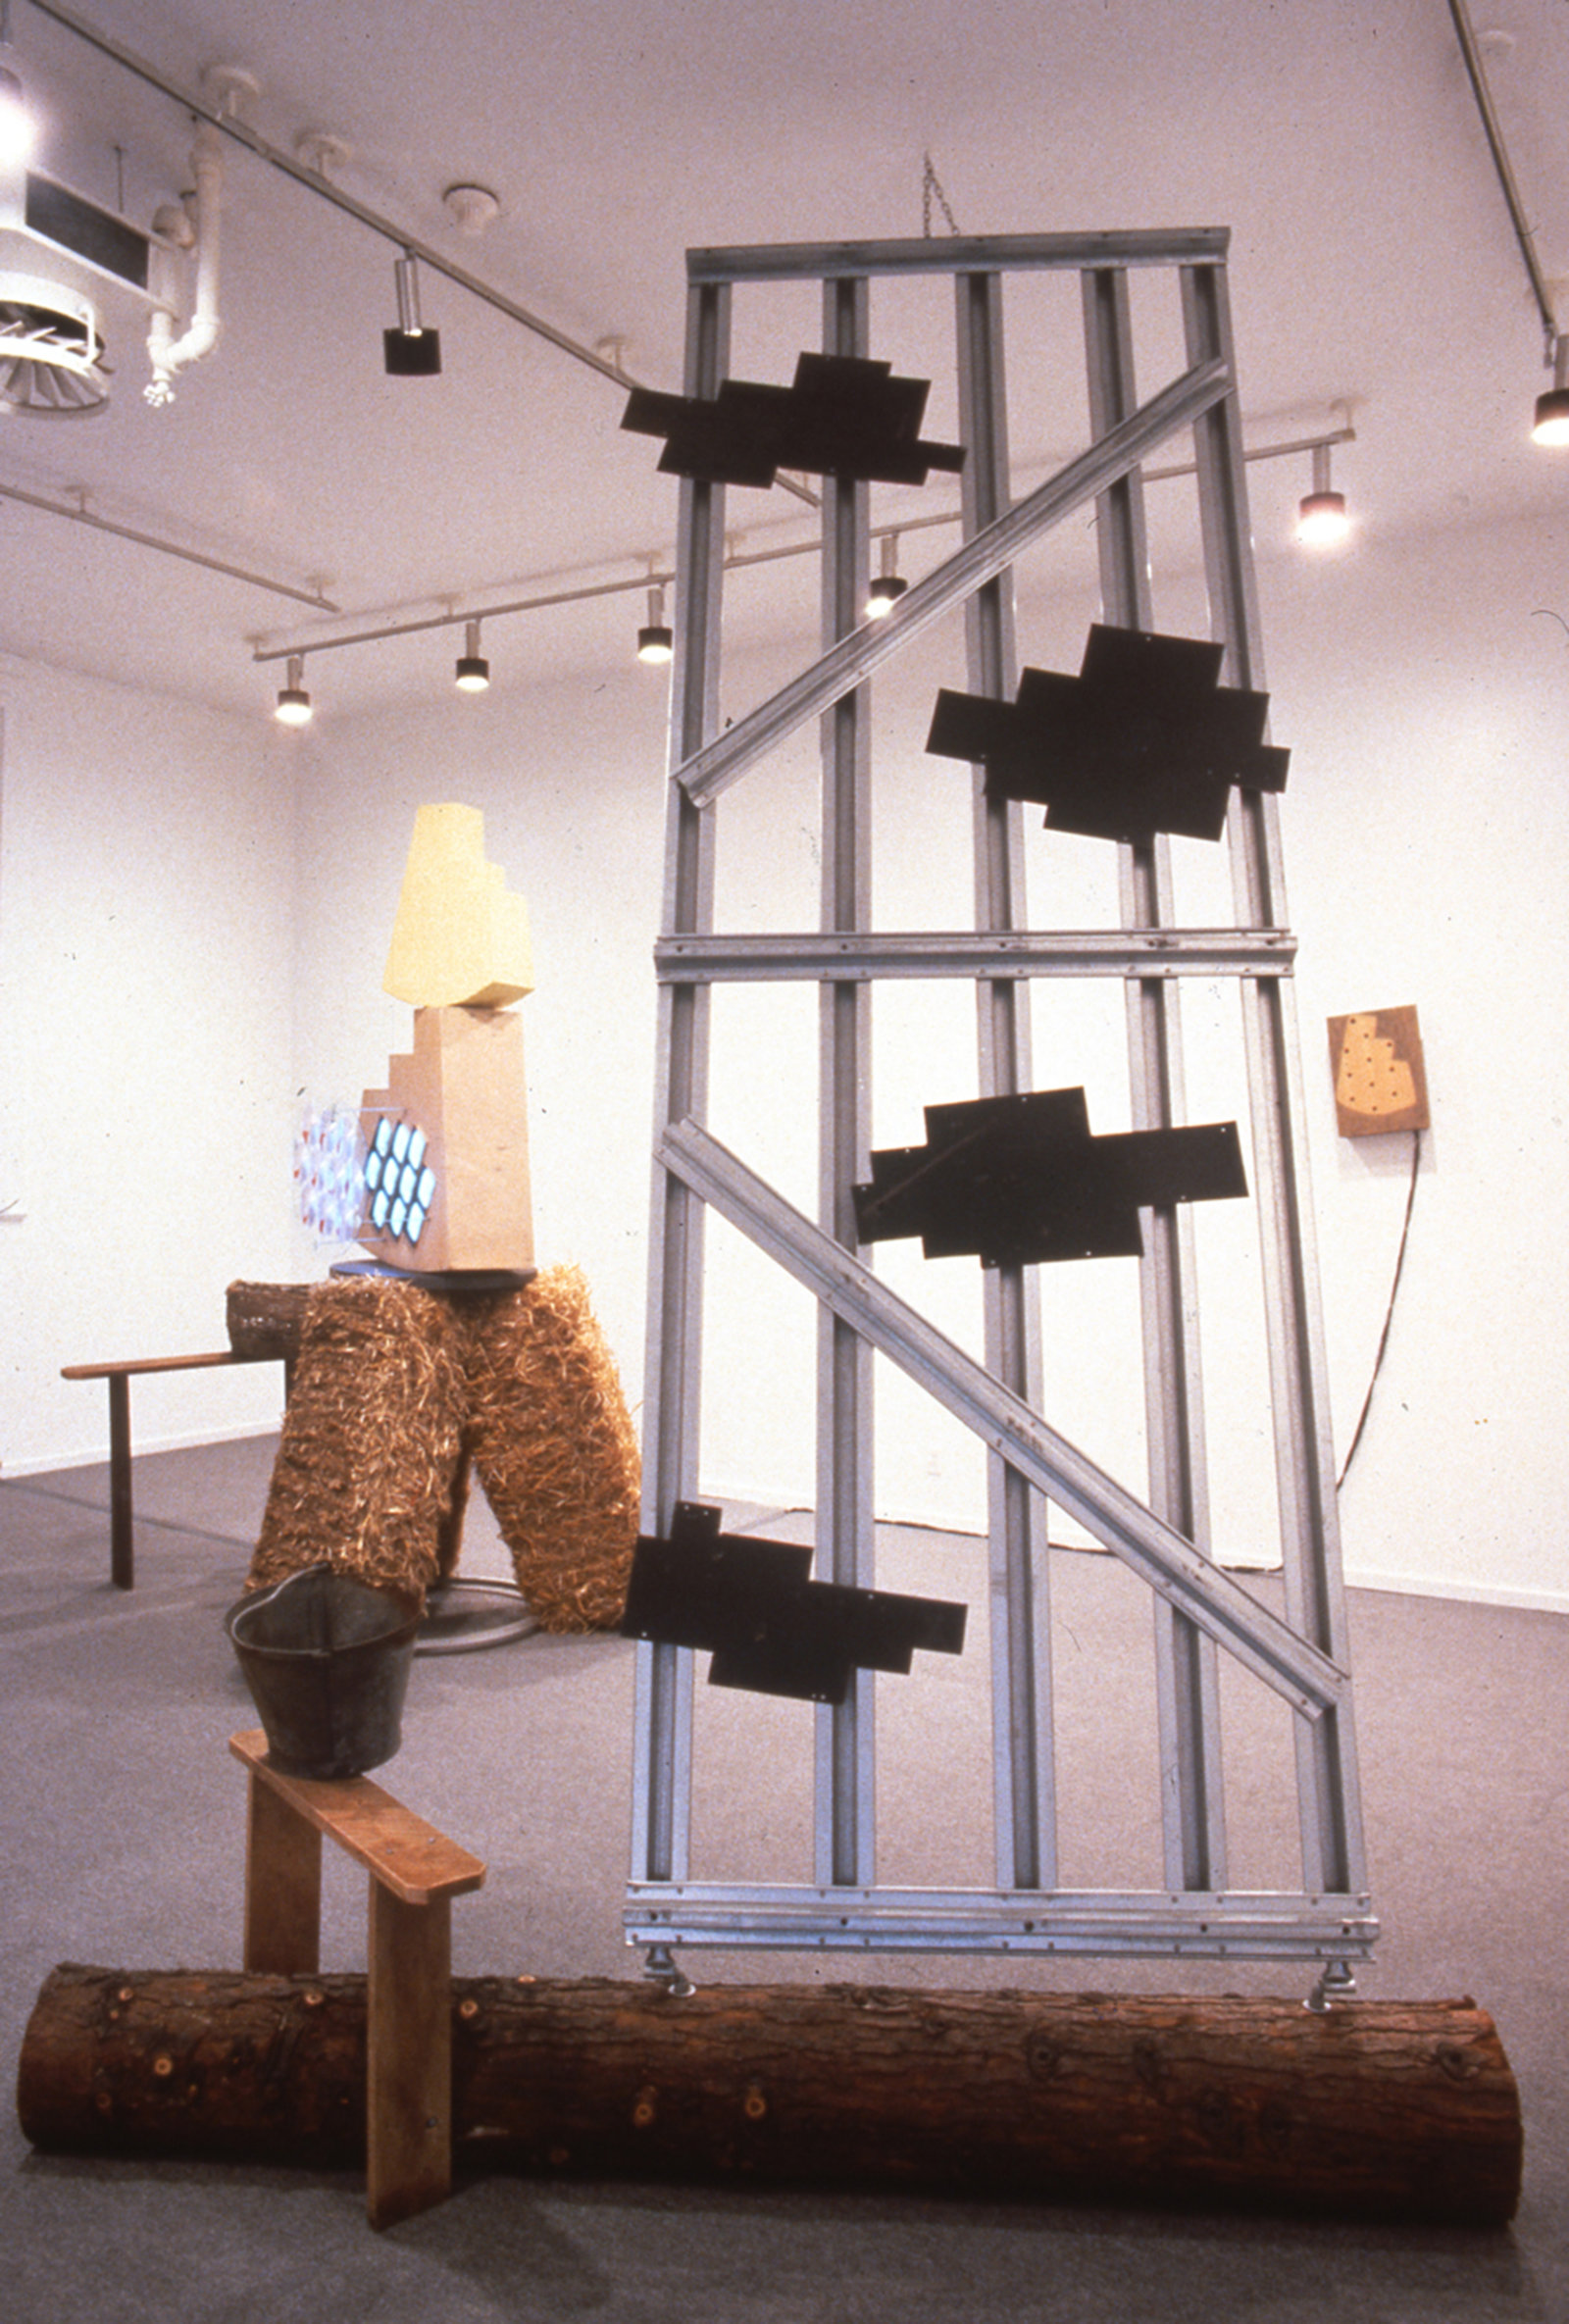 Jerry Pethick, Drawn on the Eye, 1991–1994, straw bales, gate, monitors, cameras, wood, enamelled steel, sulphur, lenses, pail, basket, transformers, 156 x 360 x 132 in. (396 x 914 x 335 cm)